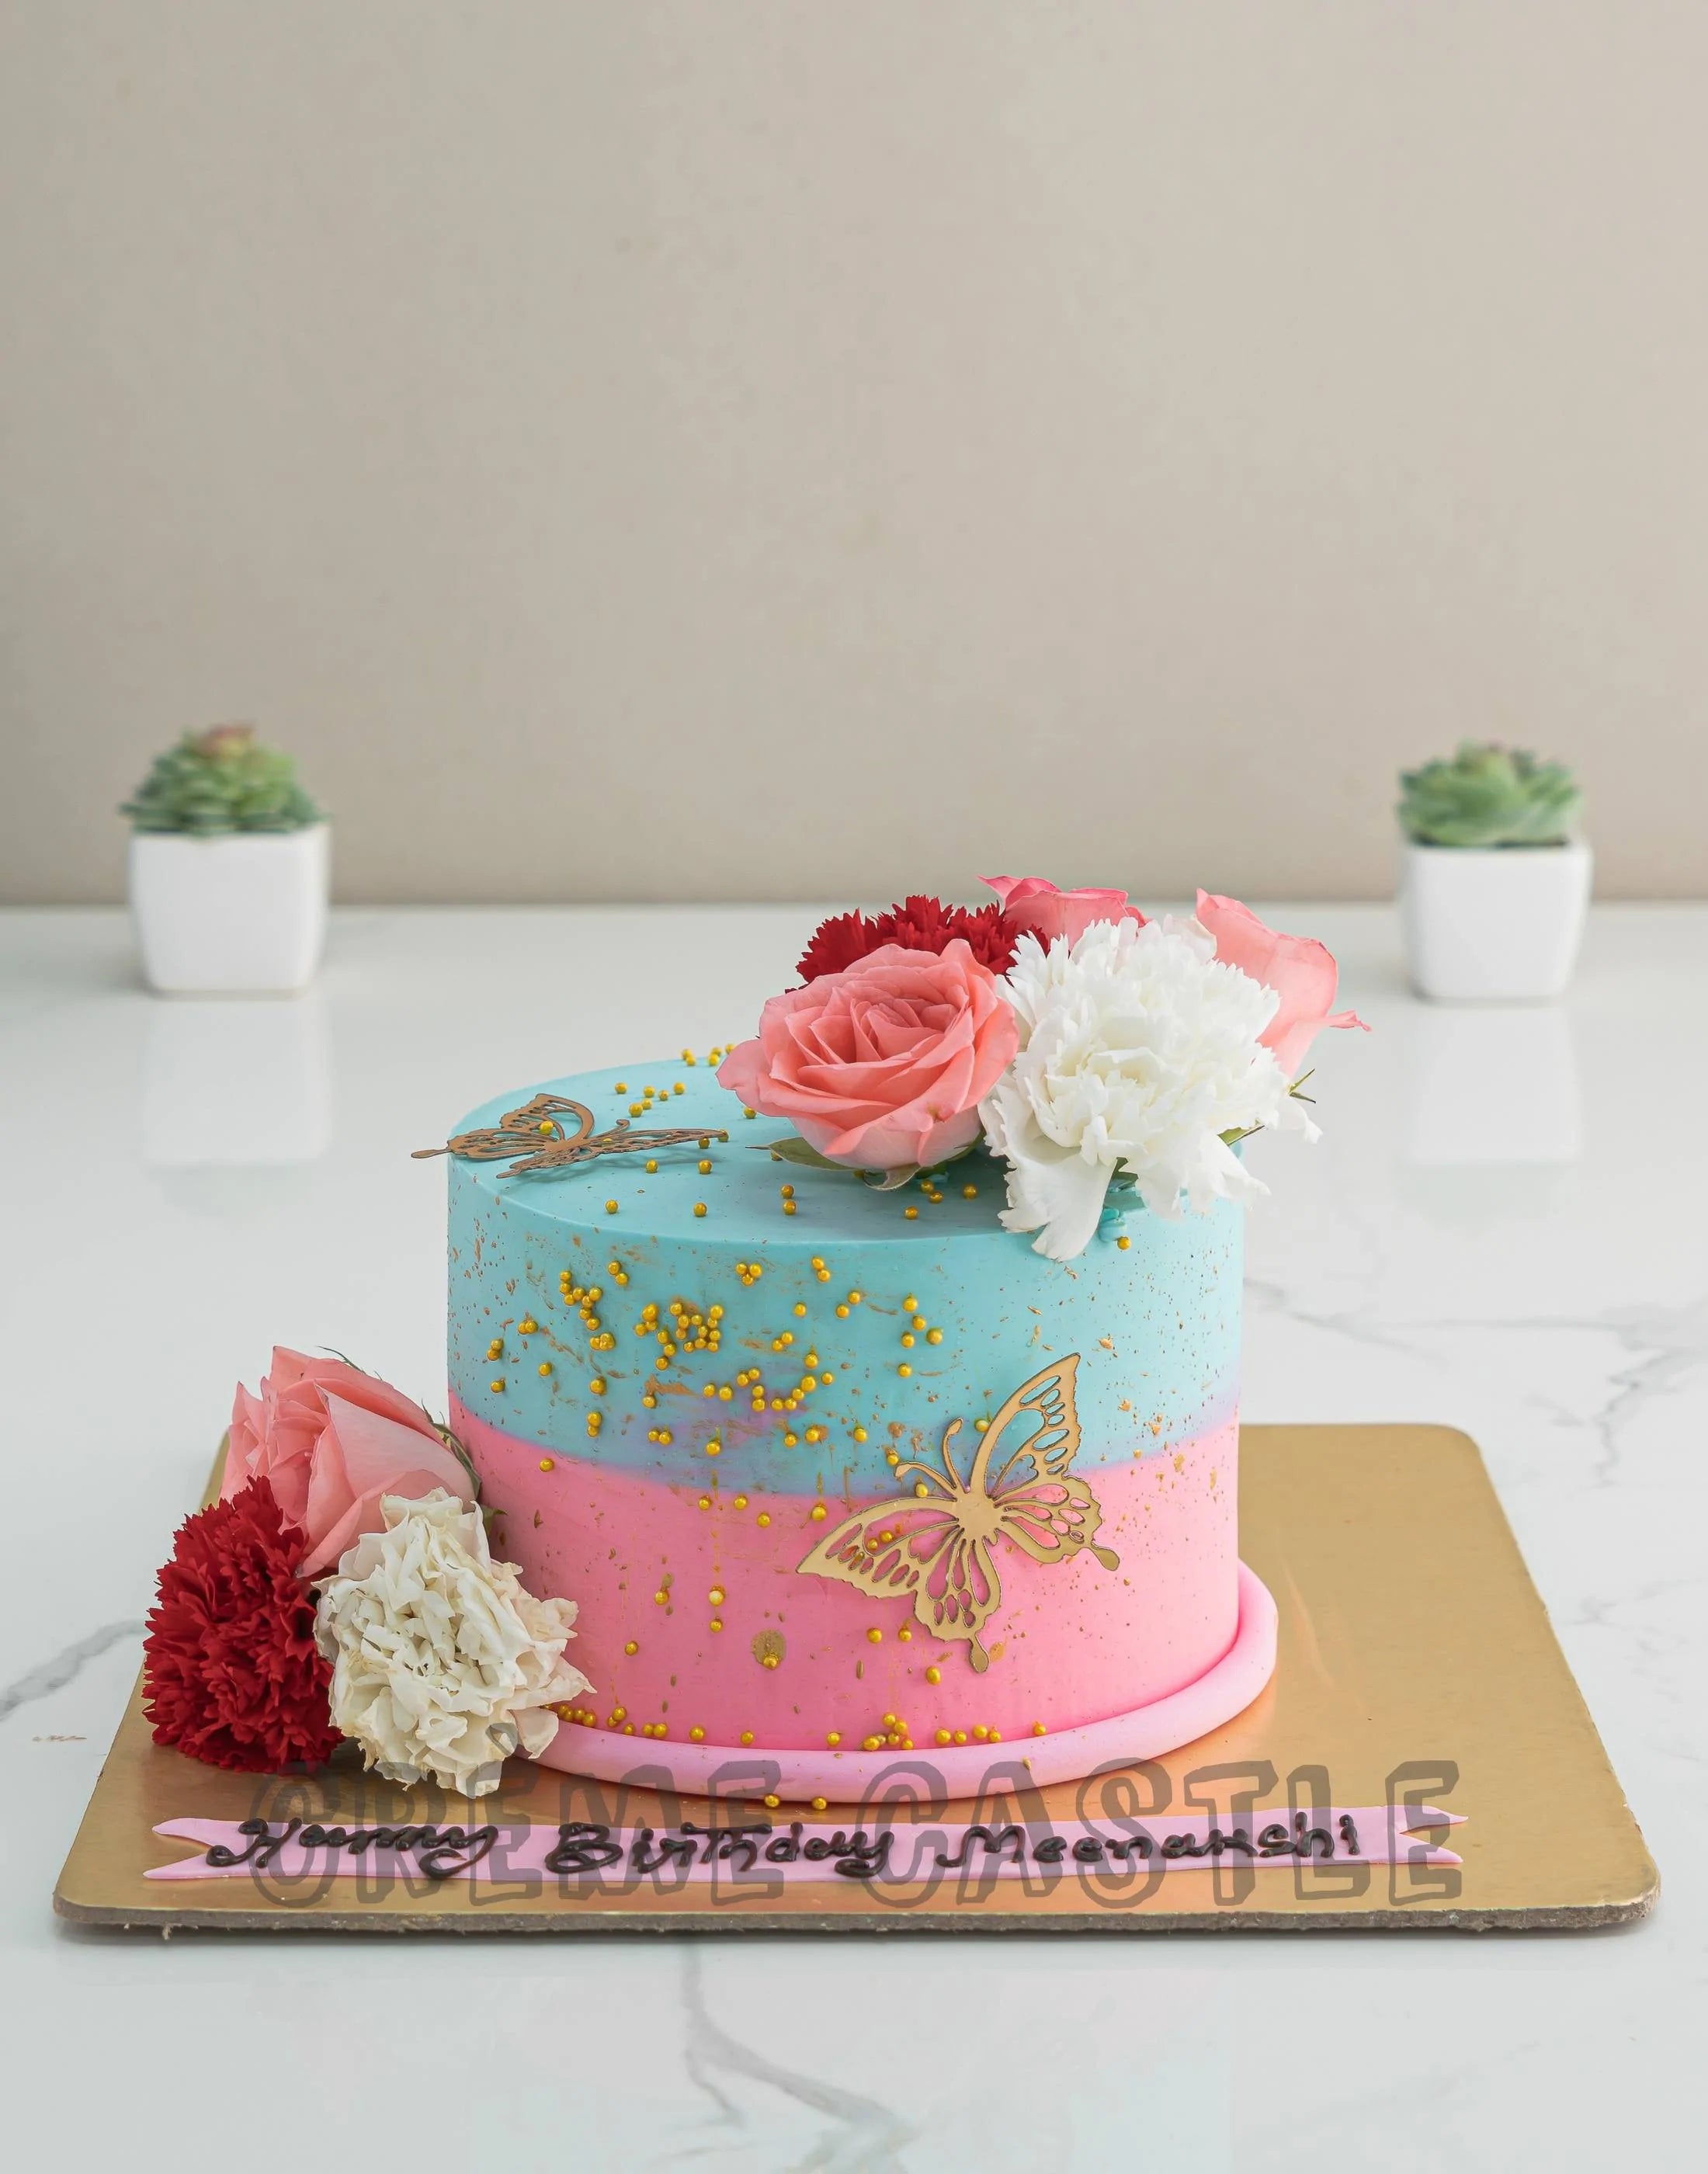 100 Pretty Wedding Cakes To Inspire You - Floral Cake